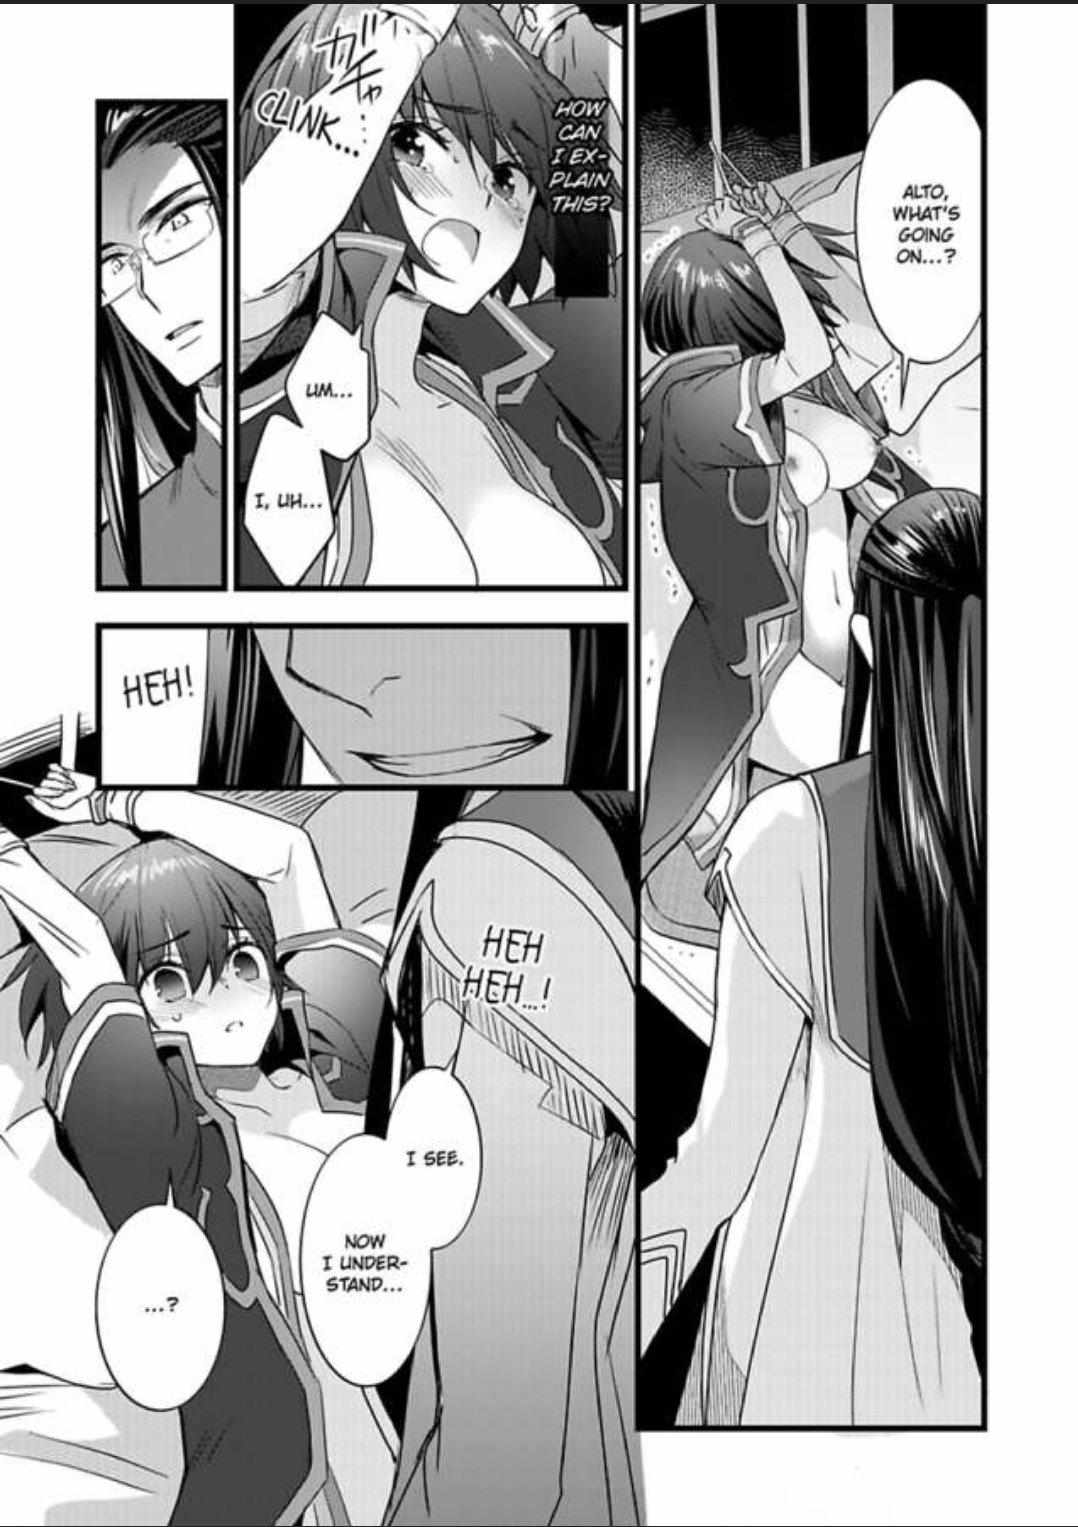 I Turned Into A Girl And Turned On All The Knights! -I Need To Have Sex To Turn Back!- - Page 2